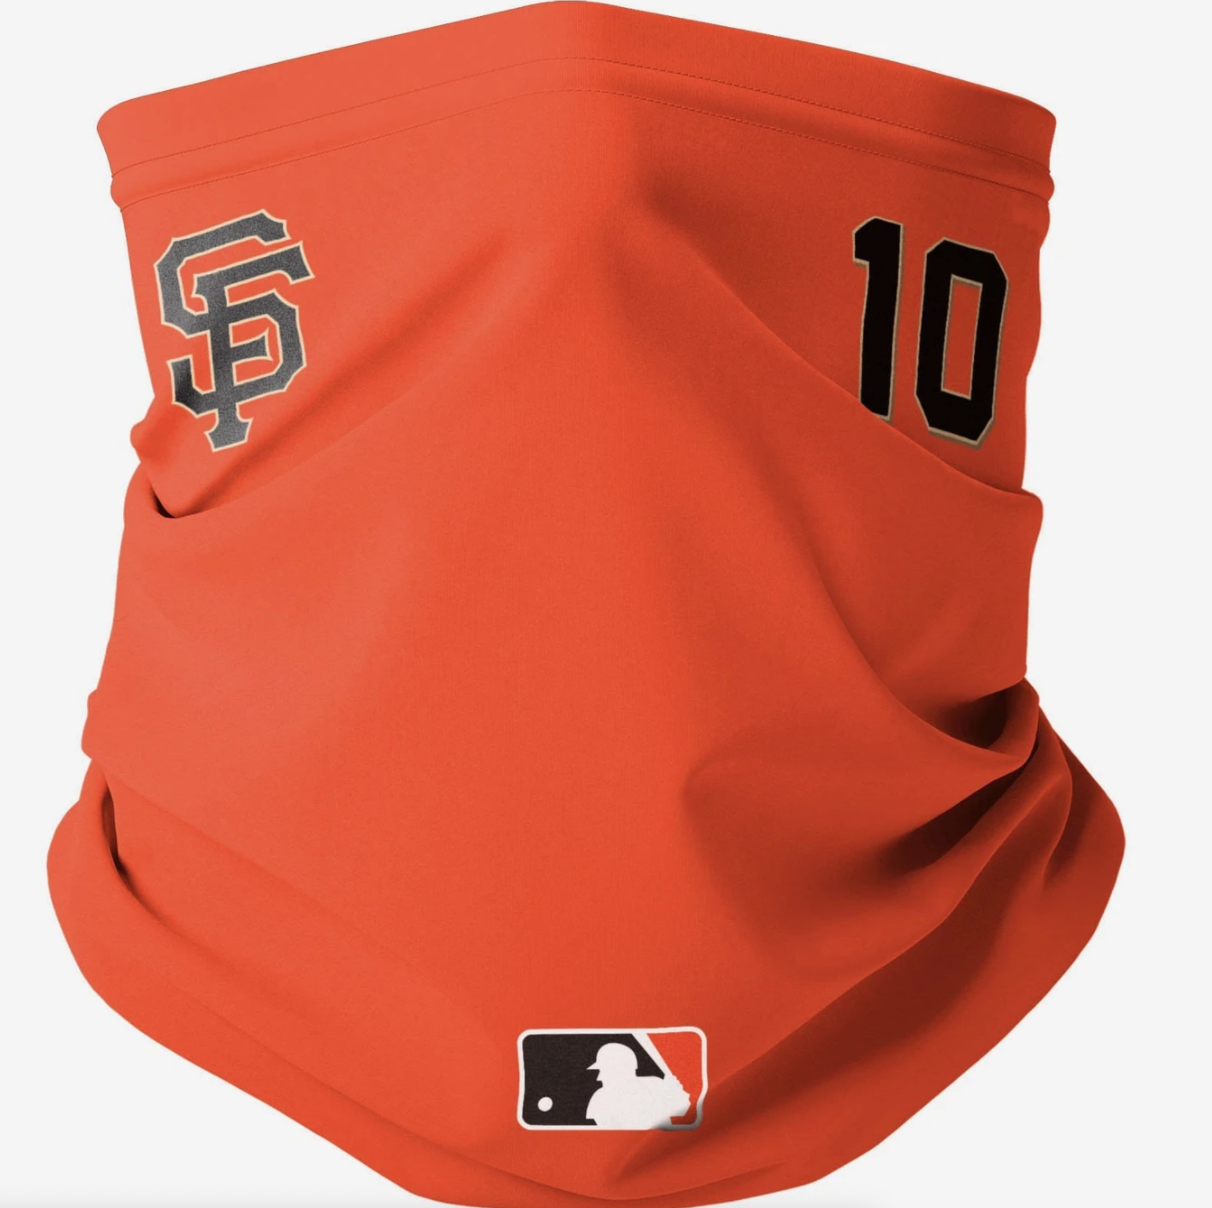 San Francisco Giants Gameday face masks are the perfect face cover